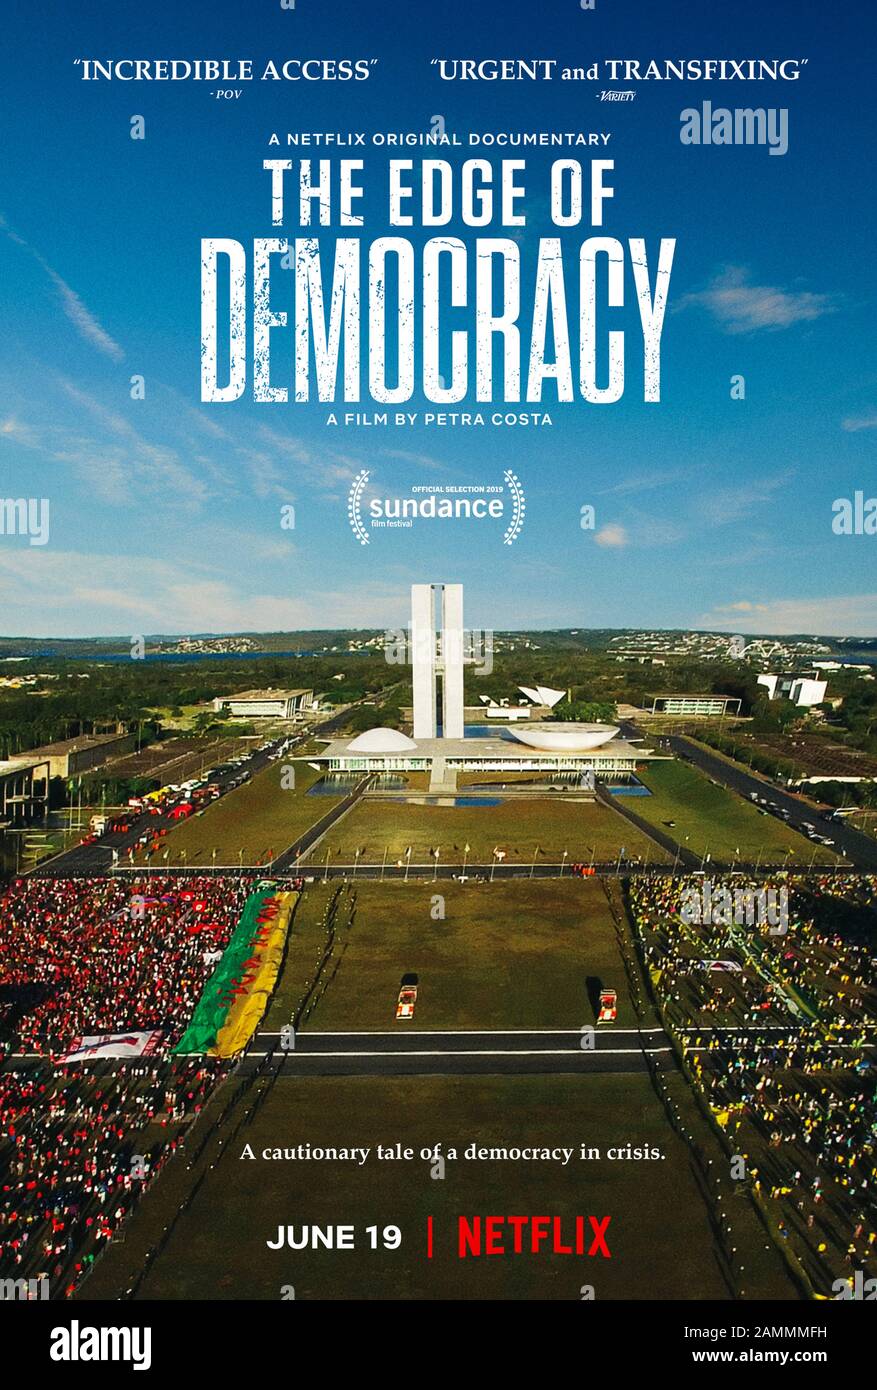 The Edge of Democracy (2019) directed by Petra Costa and starring Dilma Rousseff, Luiz Inácio Lula da Silva and Marisa Letícia Lula da Silva. Documentary about the political turmoil in Brazil at the start of the 21st century. Stock Photo